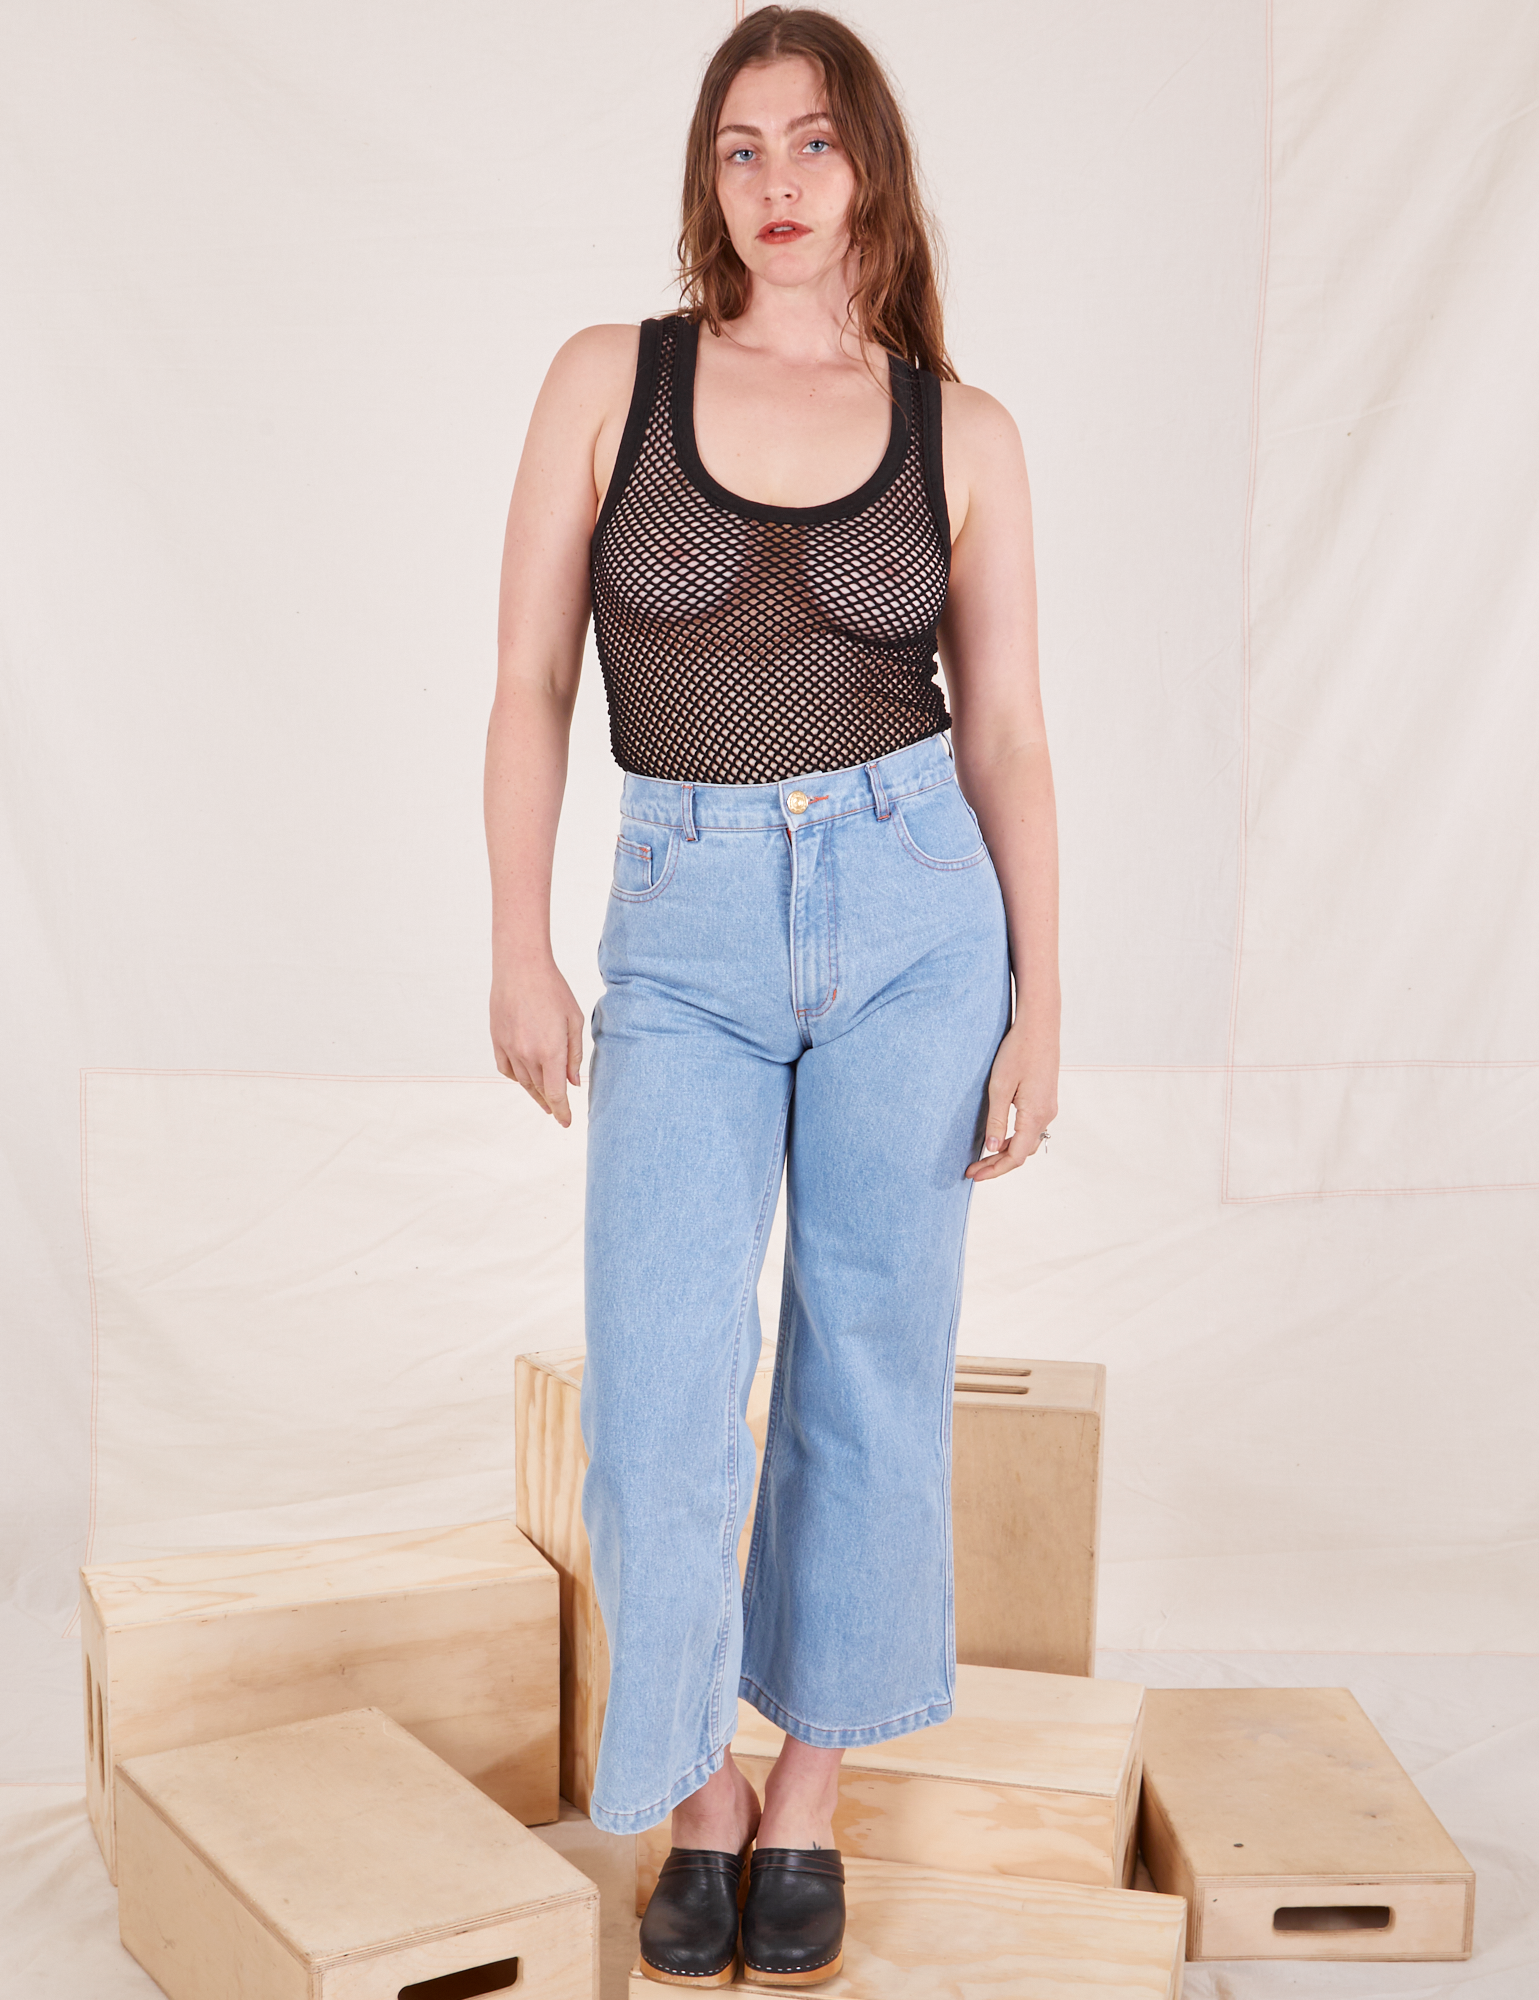 Allison is 5&#39;10 and wearing XXS Mesh Tank Top in Basic Black paired with light wash Sailor Jeans